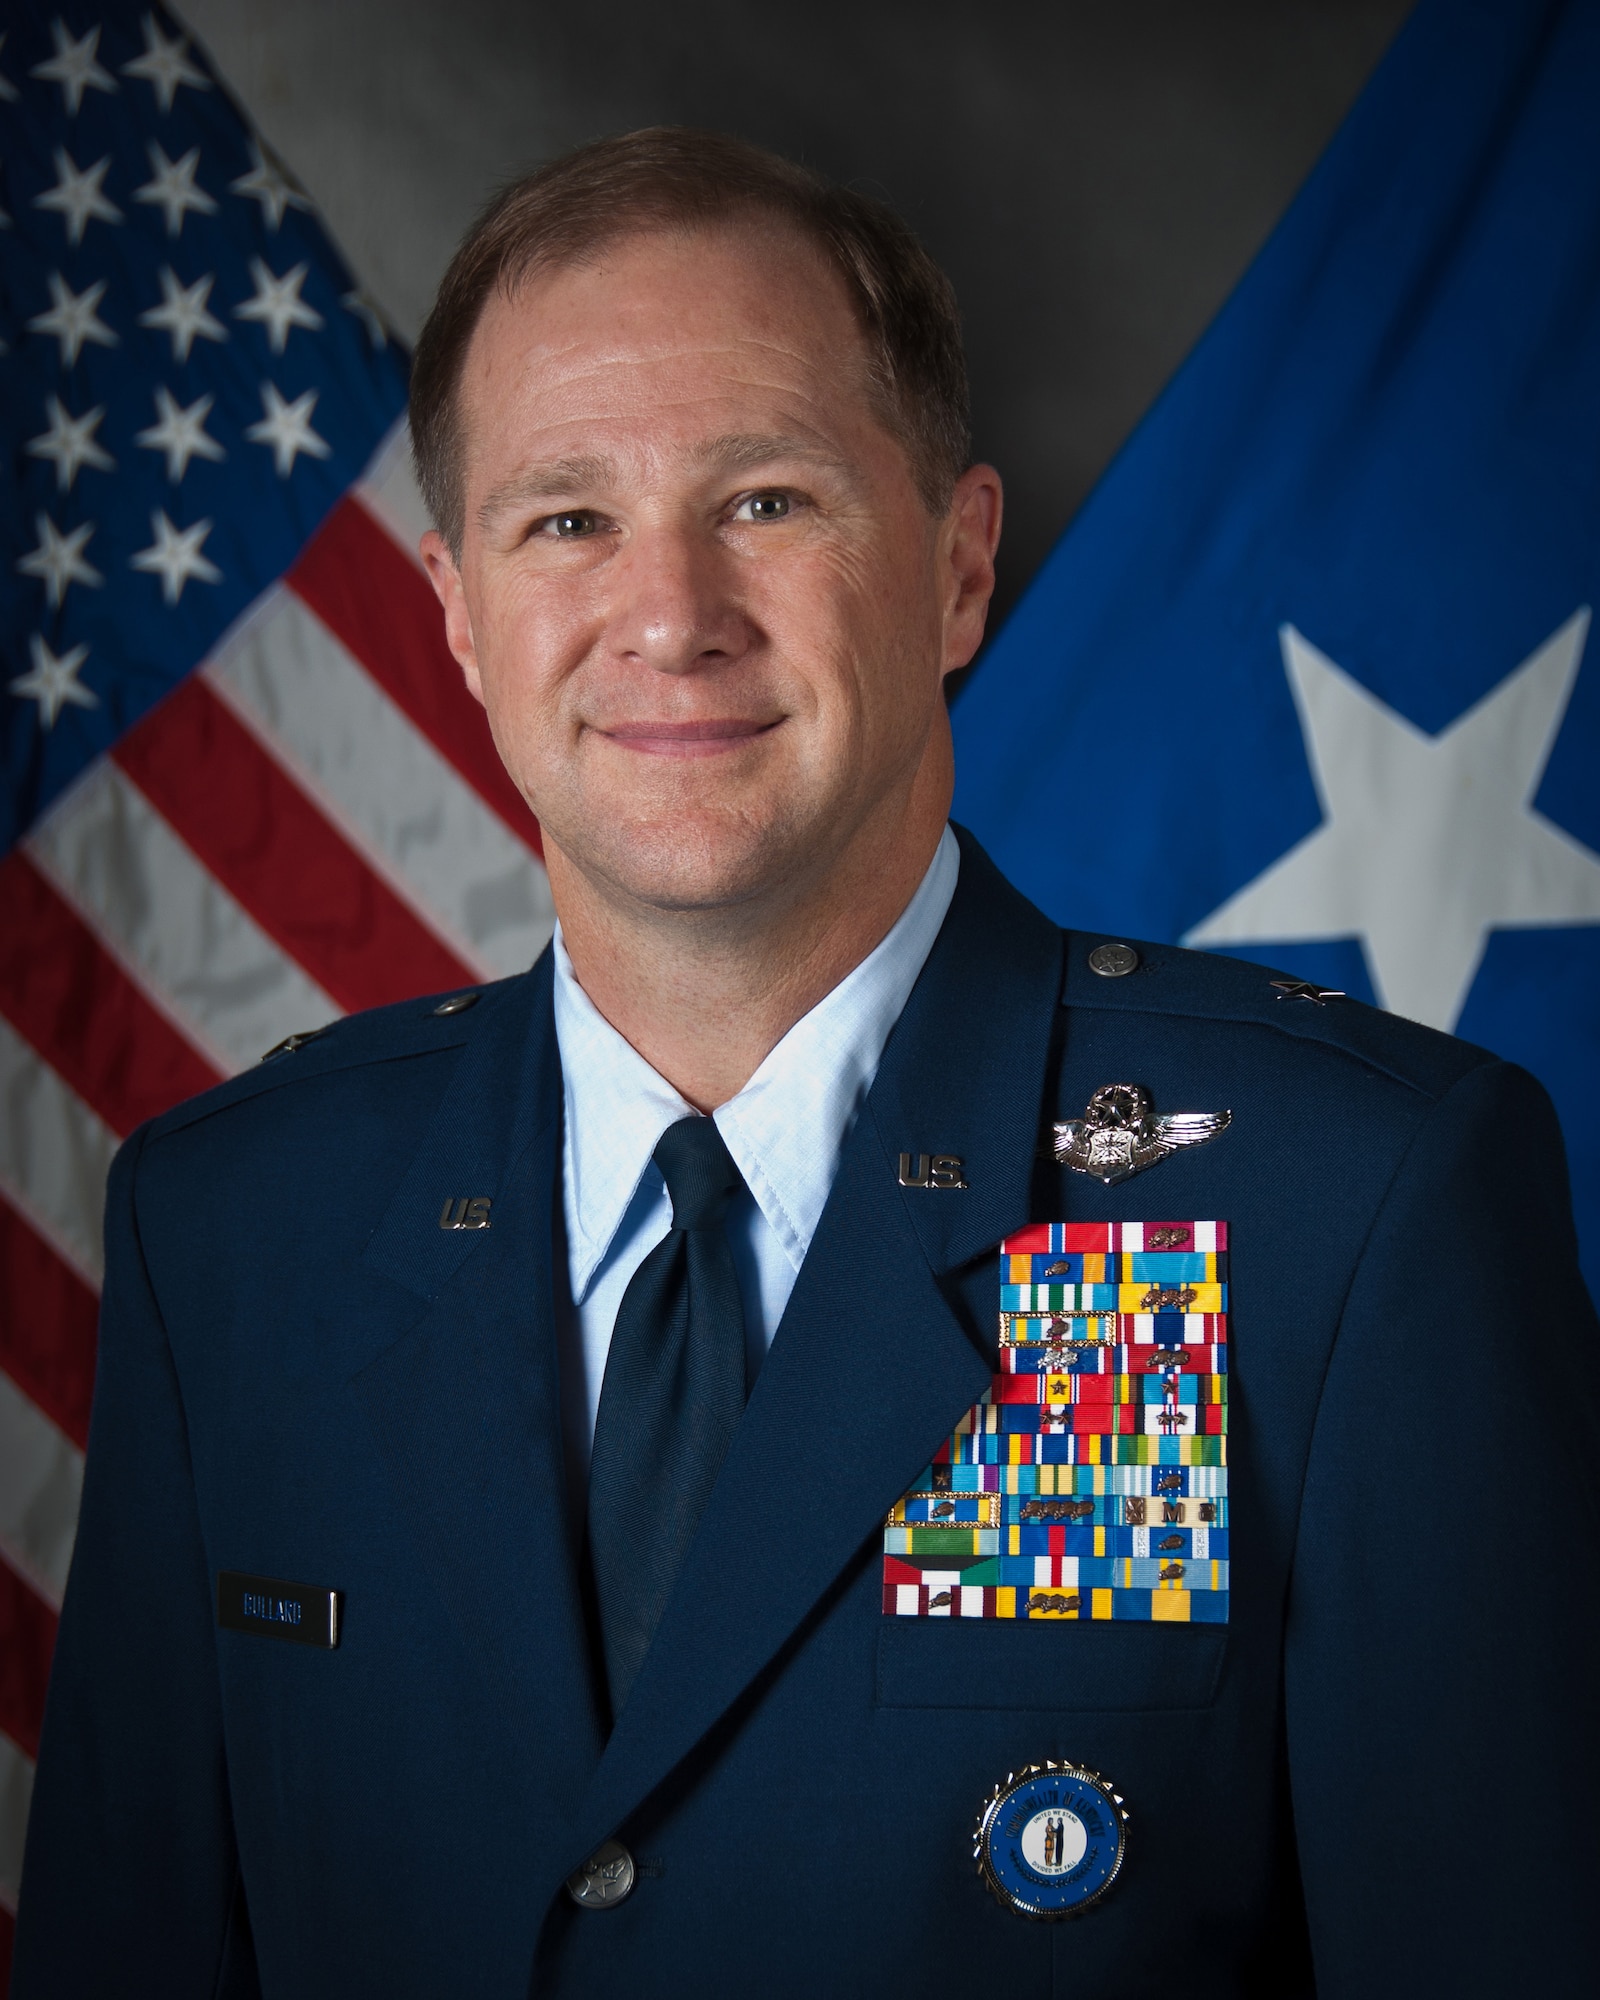 Brig. Gen. Steven Bullard, retired, has been named executive director of the Kentucky Commission on Military Affairs, effective Aug. 16, 2019. Bullard most recently served as chief of staff for the Kentucky Air National Guard and deputy director of the Joint Staff of the Kentucky National Guard, filling both roles from 2012 to 2017. He has extensive experience in legislative affairs, having represented both the military and the manufacturing industry. (Courtesy Photo)